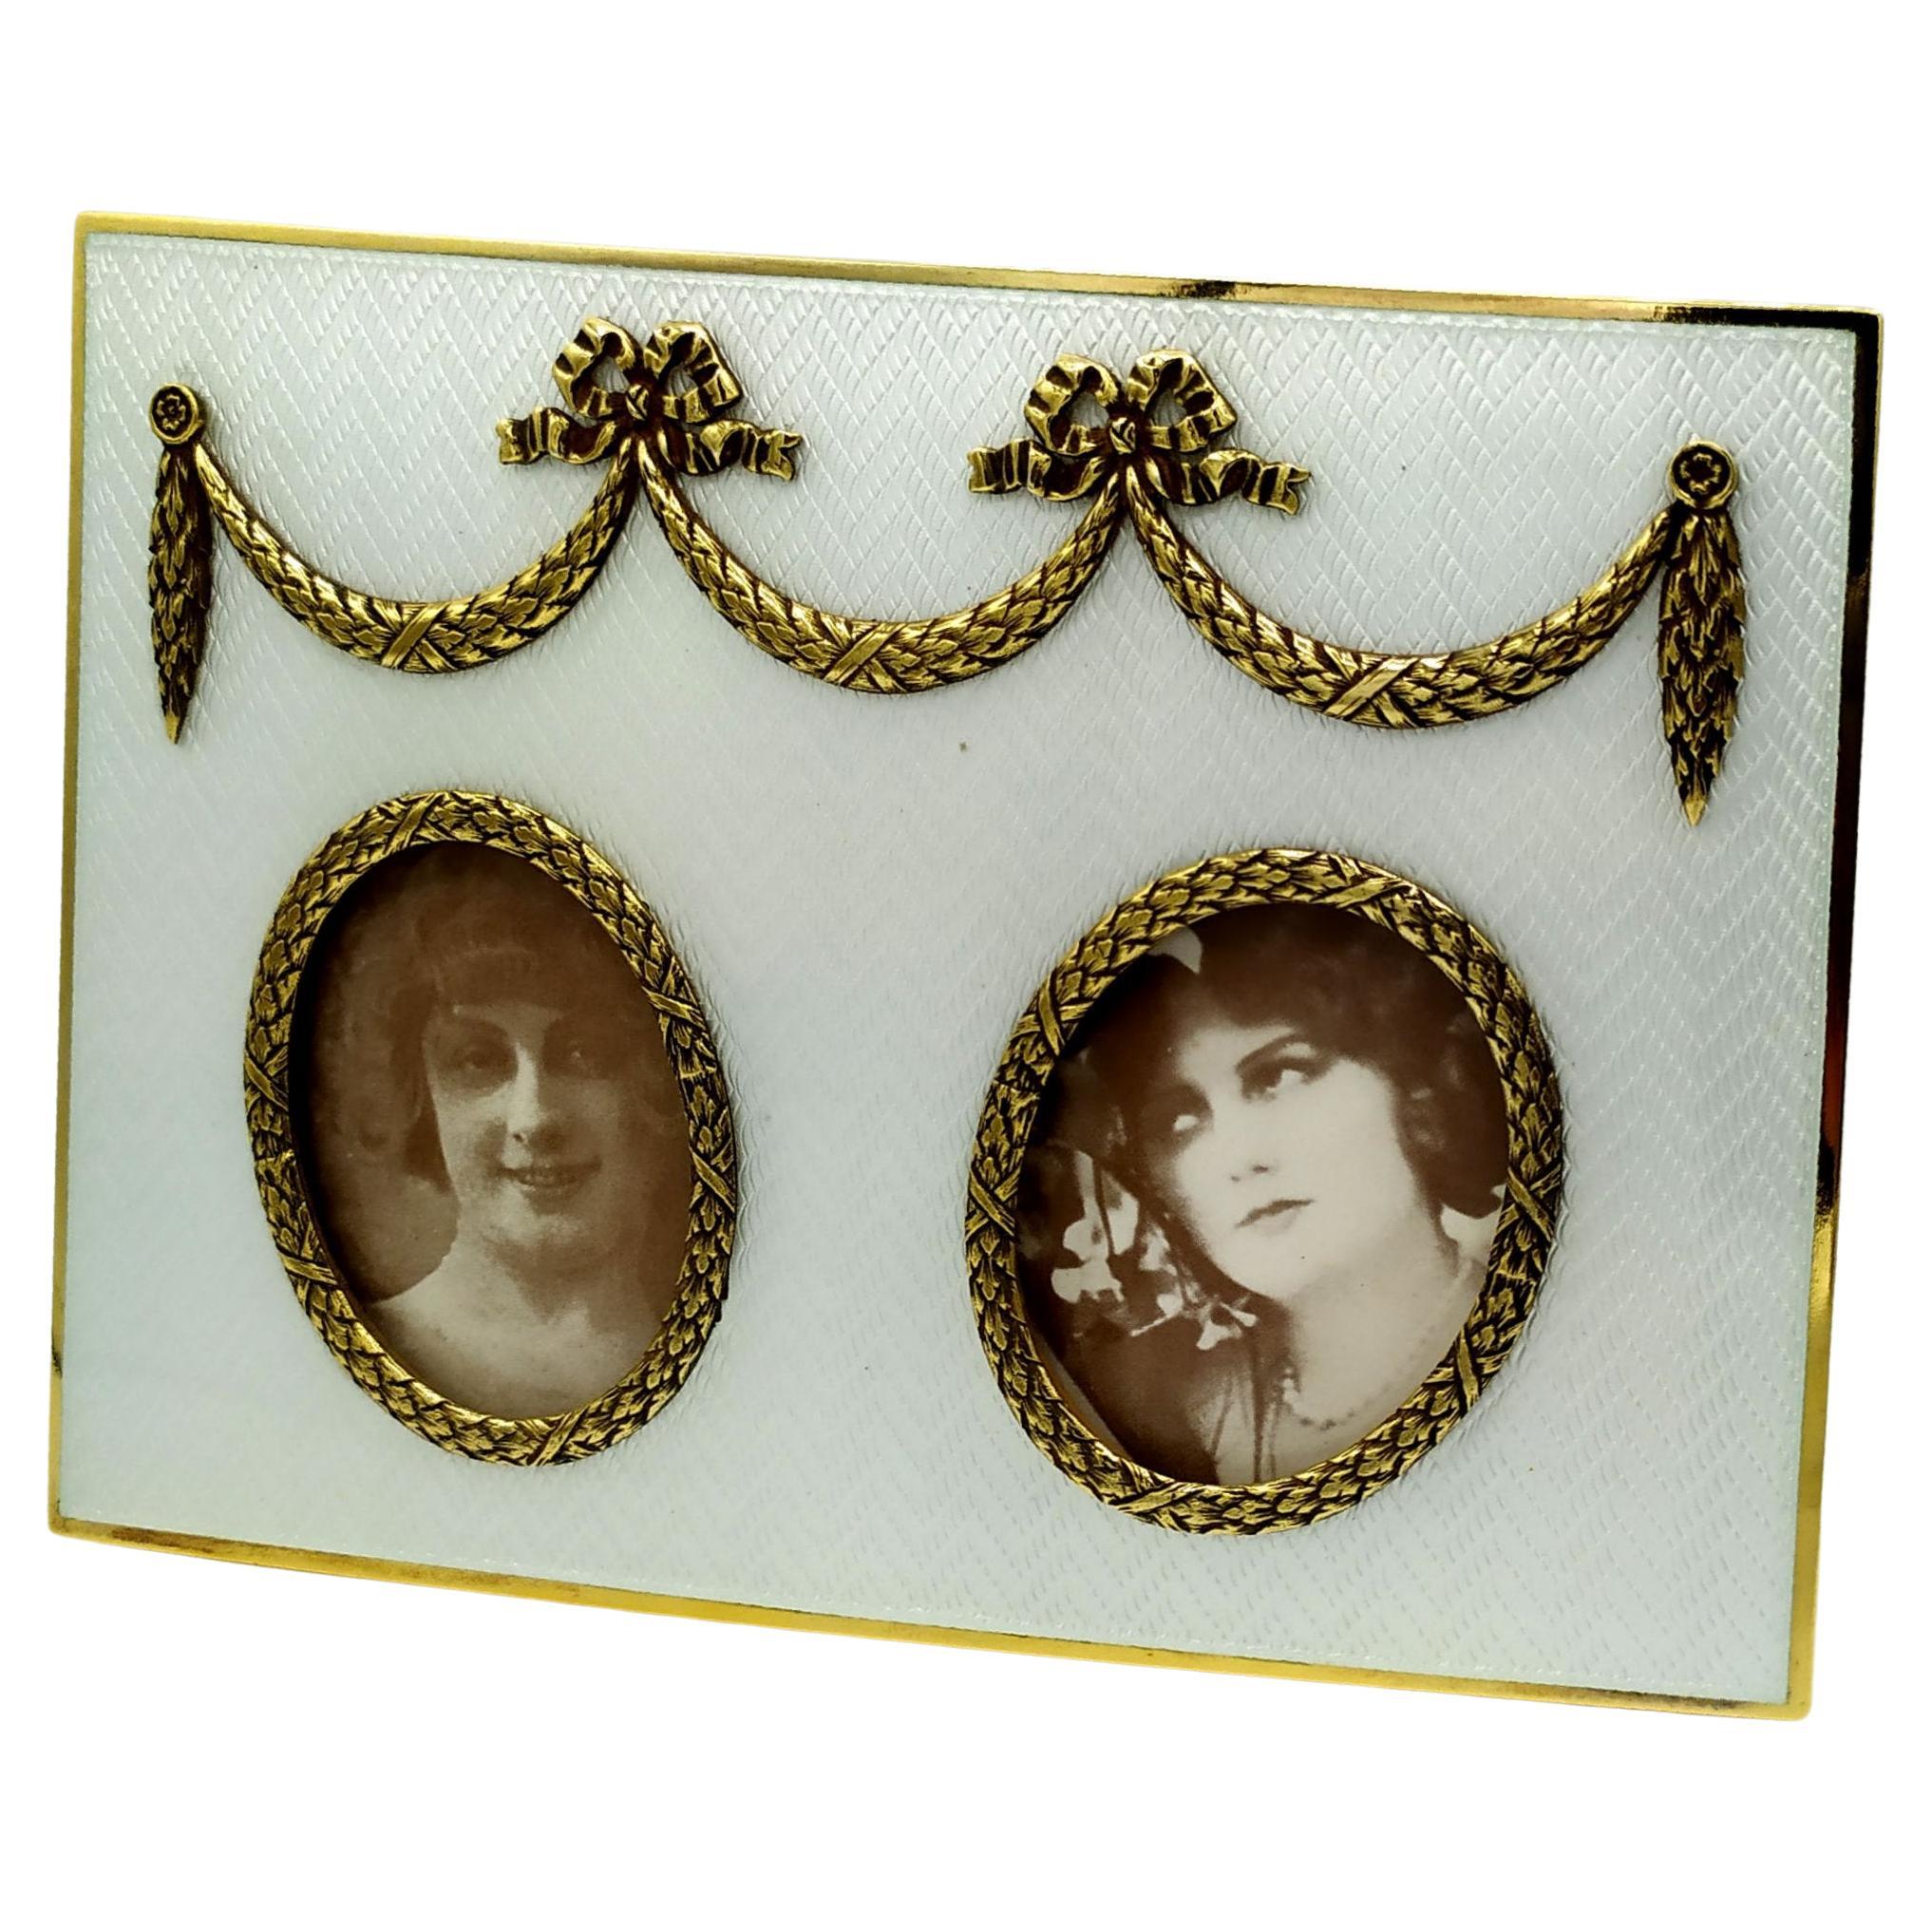 Russian Empire Fabergè style Rectangular photo frame with 2 oval borders and orn